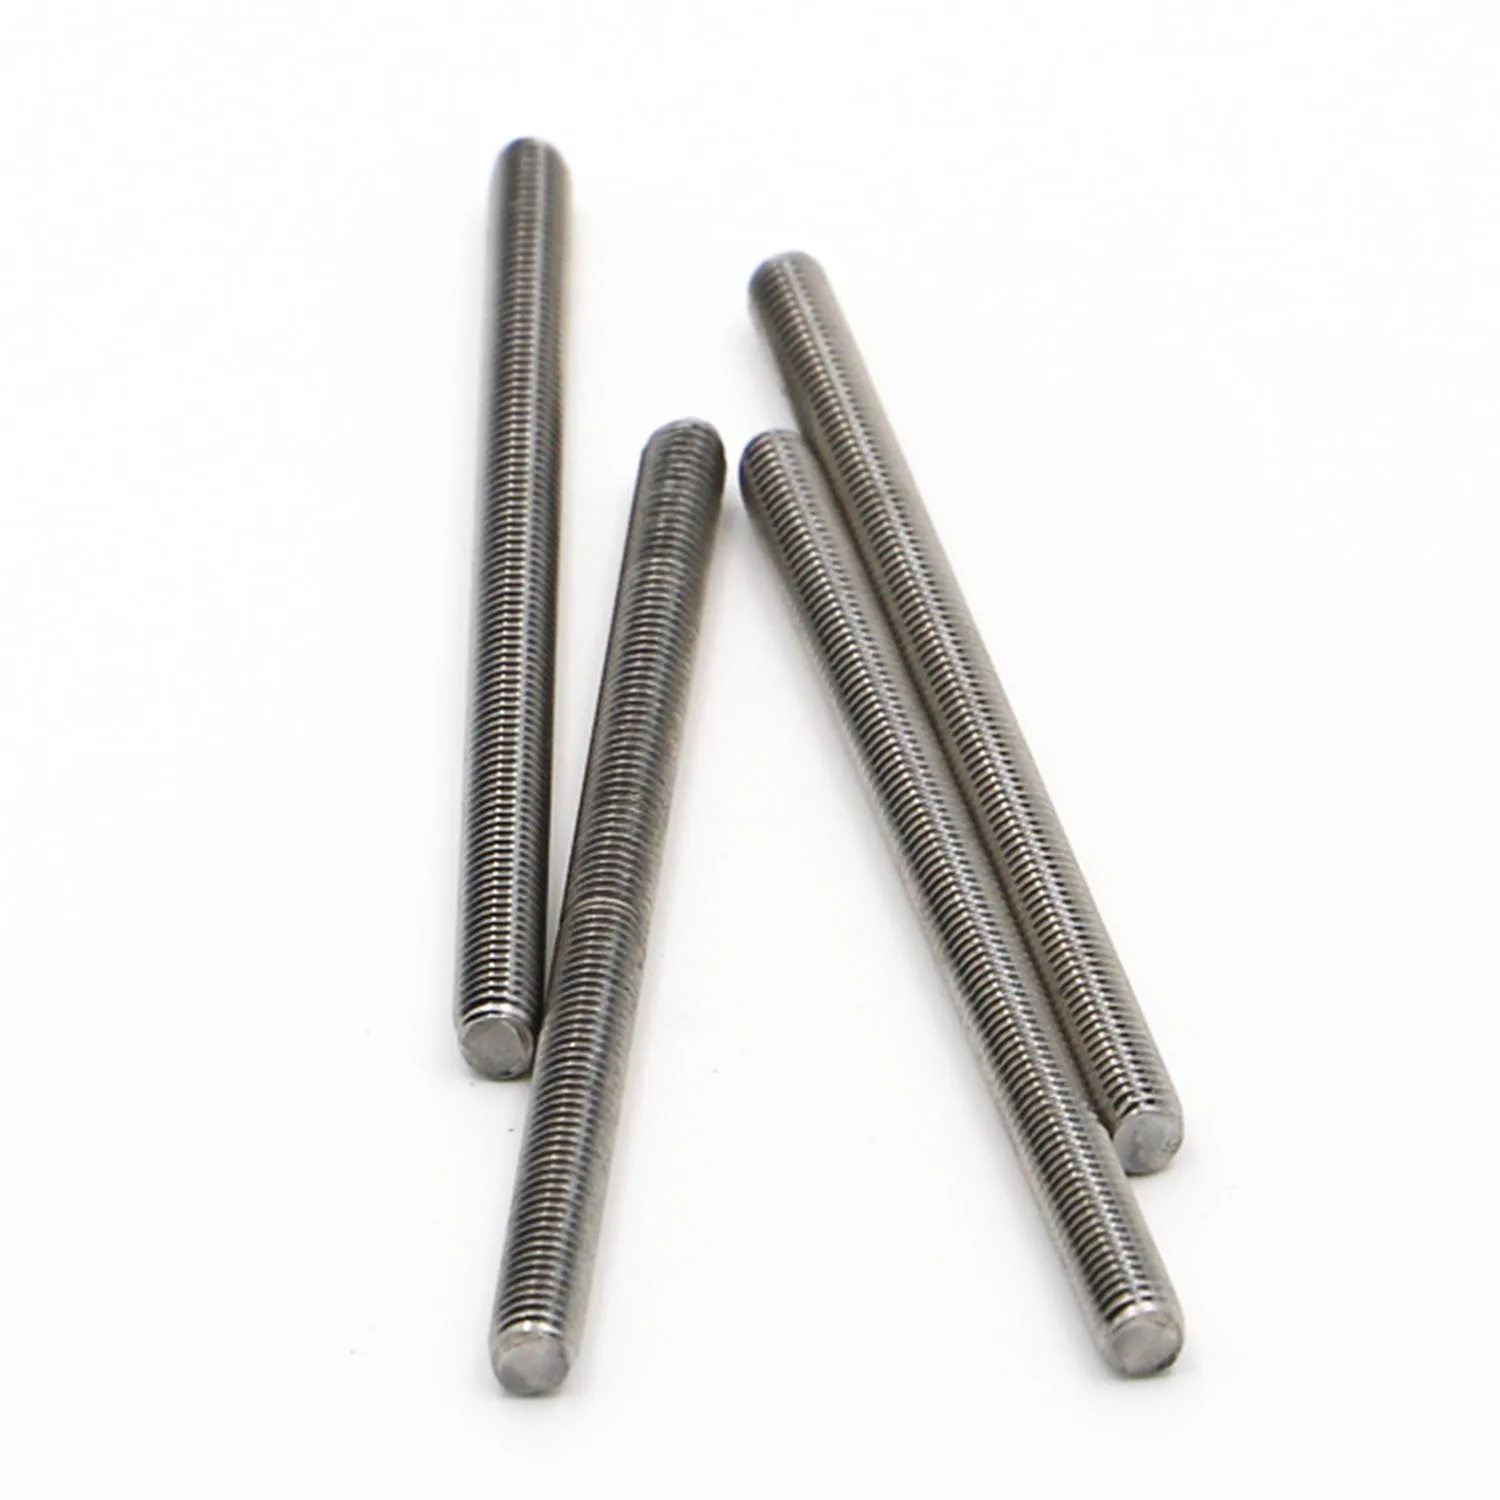 M3 M4 M5 M6 M8 Threaded Rod Full-Thread Bar DIN975 304 Stainless Steel Fasteners Silver Length =16-100mm images - 6